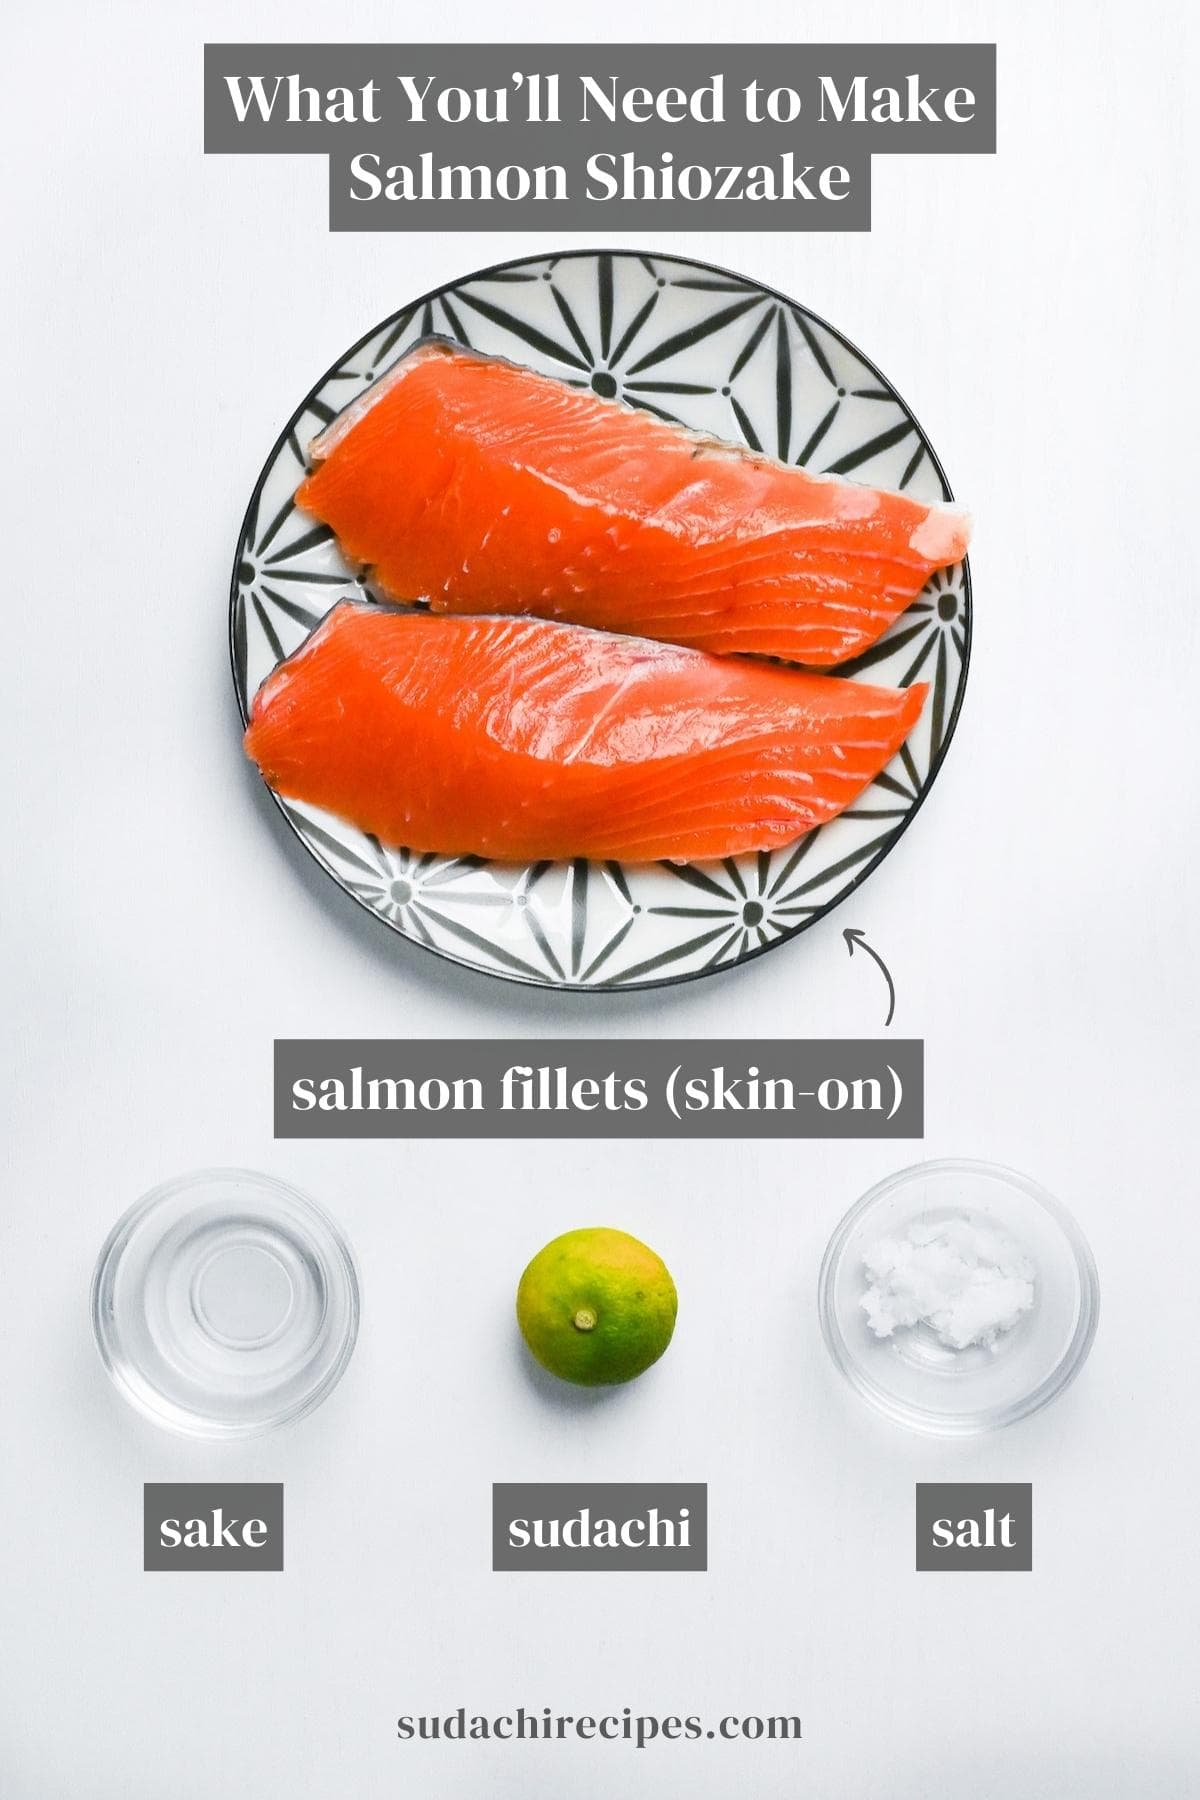 salmon shiozake ingredients on a white background with labels